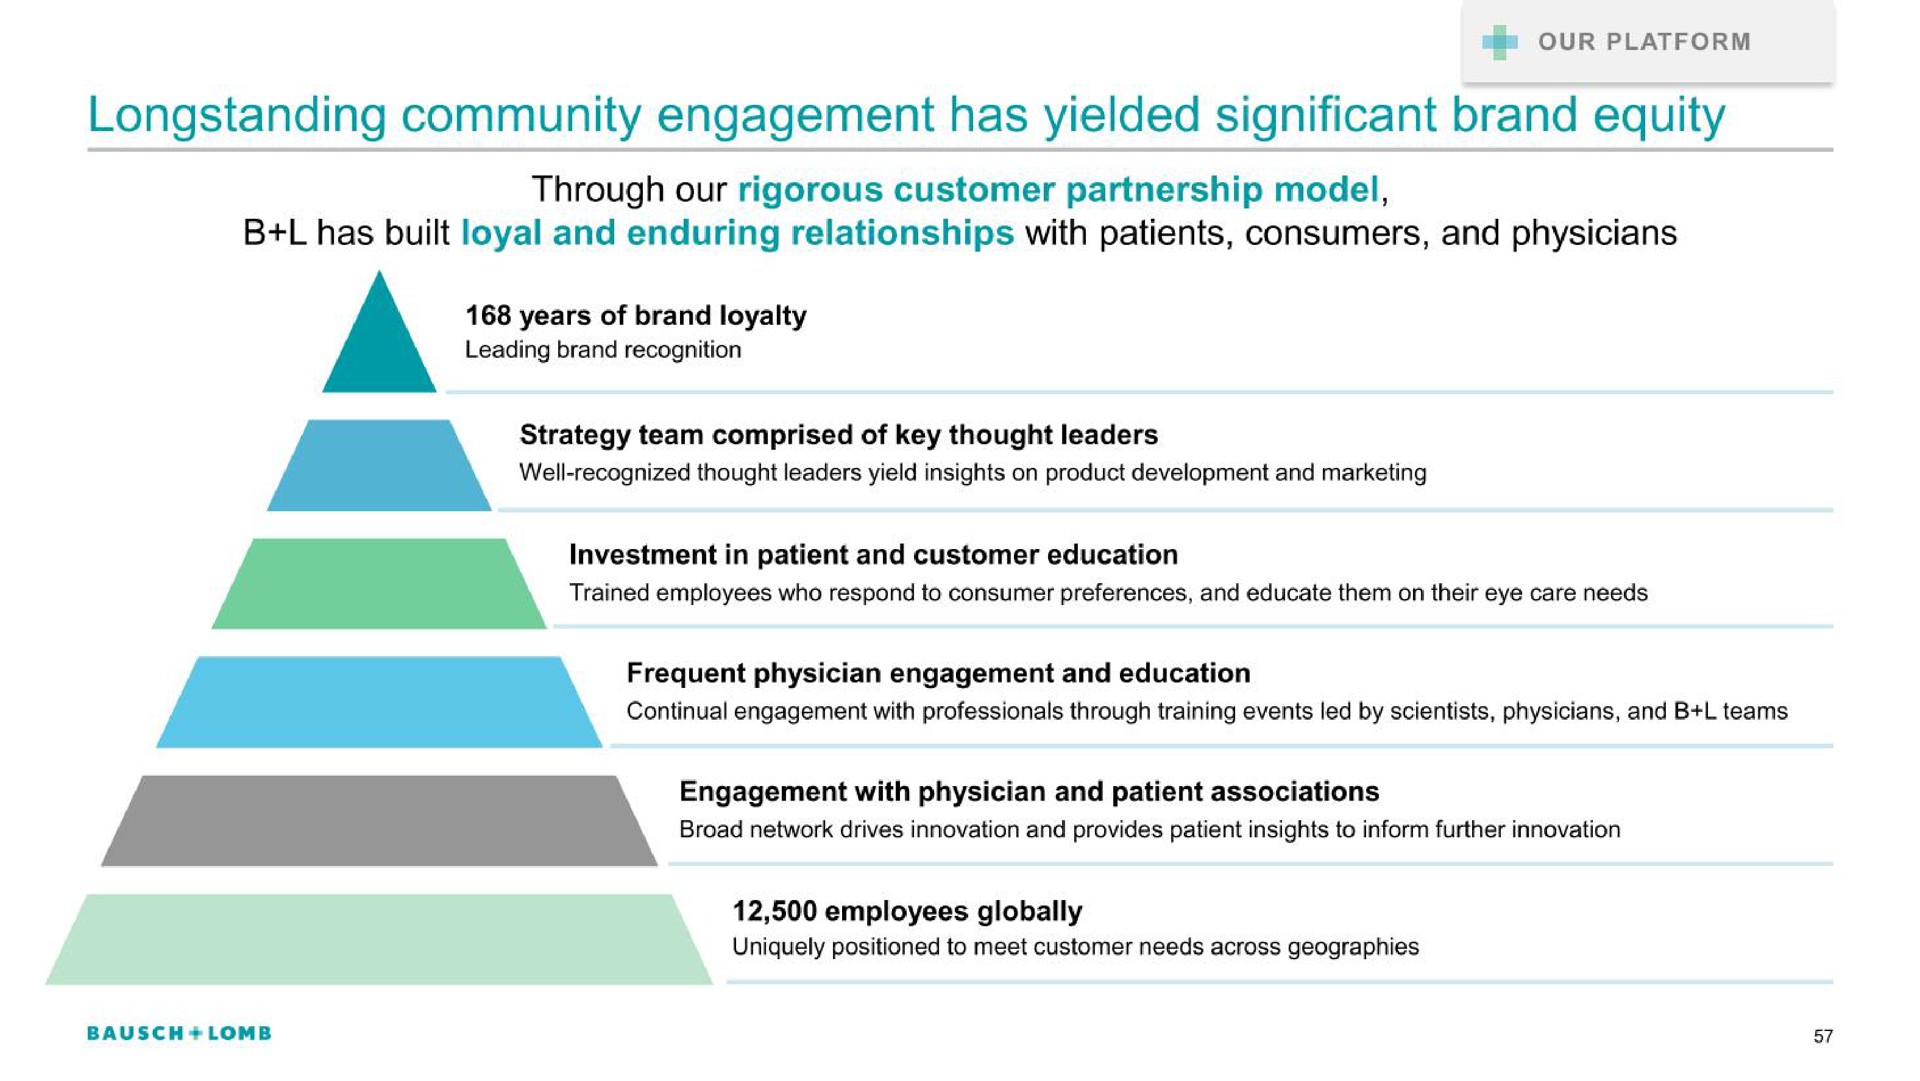 community engagement has yielded significant brand equity | Bausch+Lomb